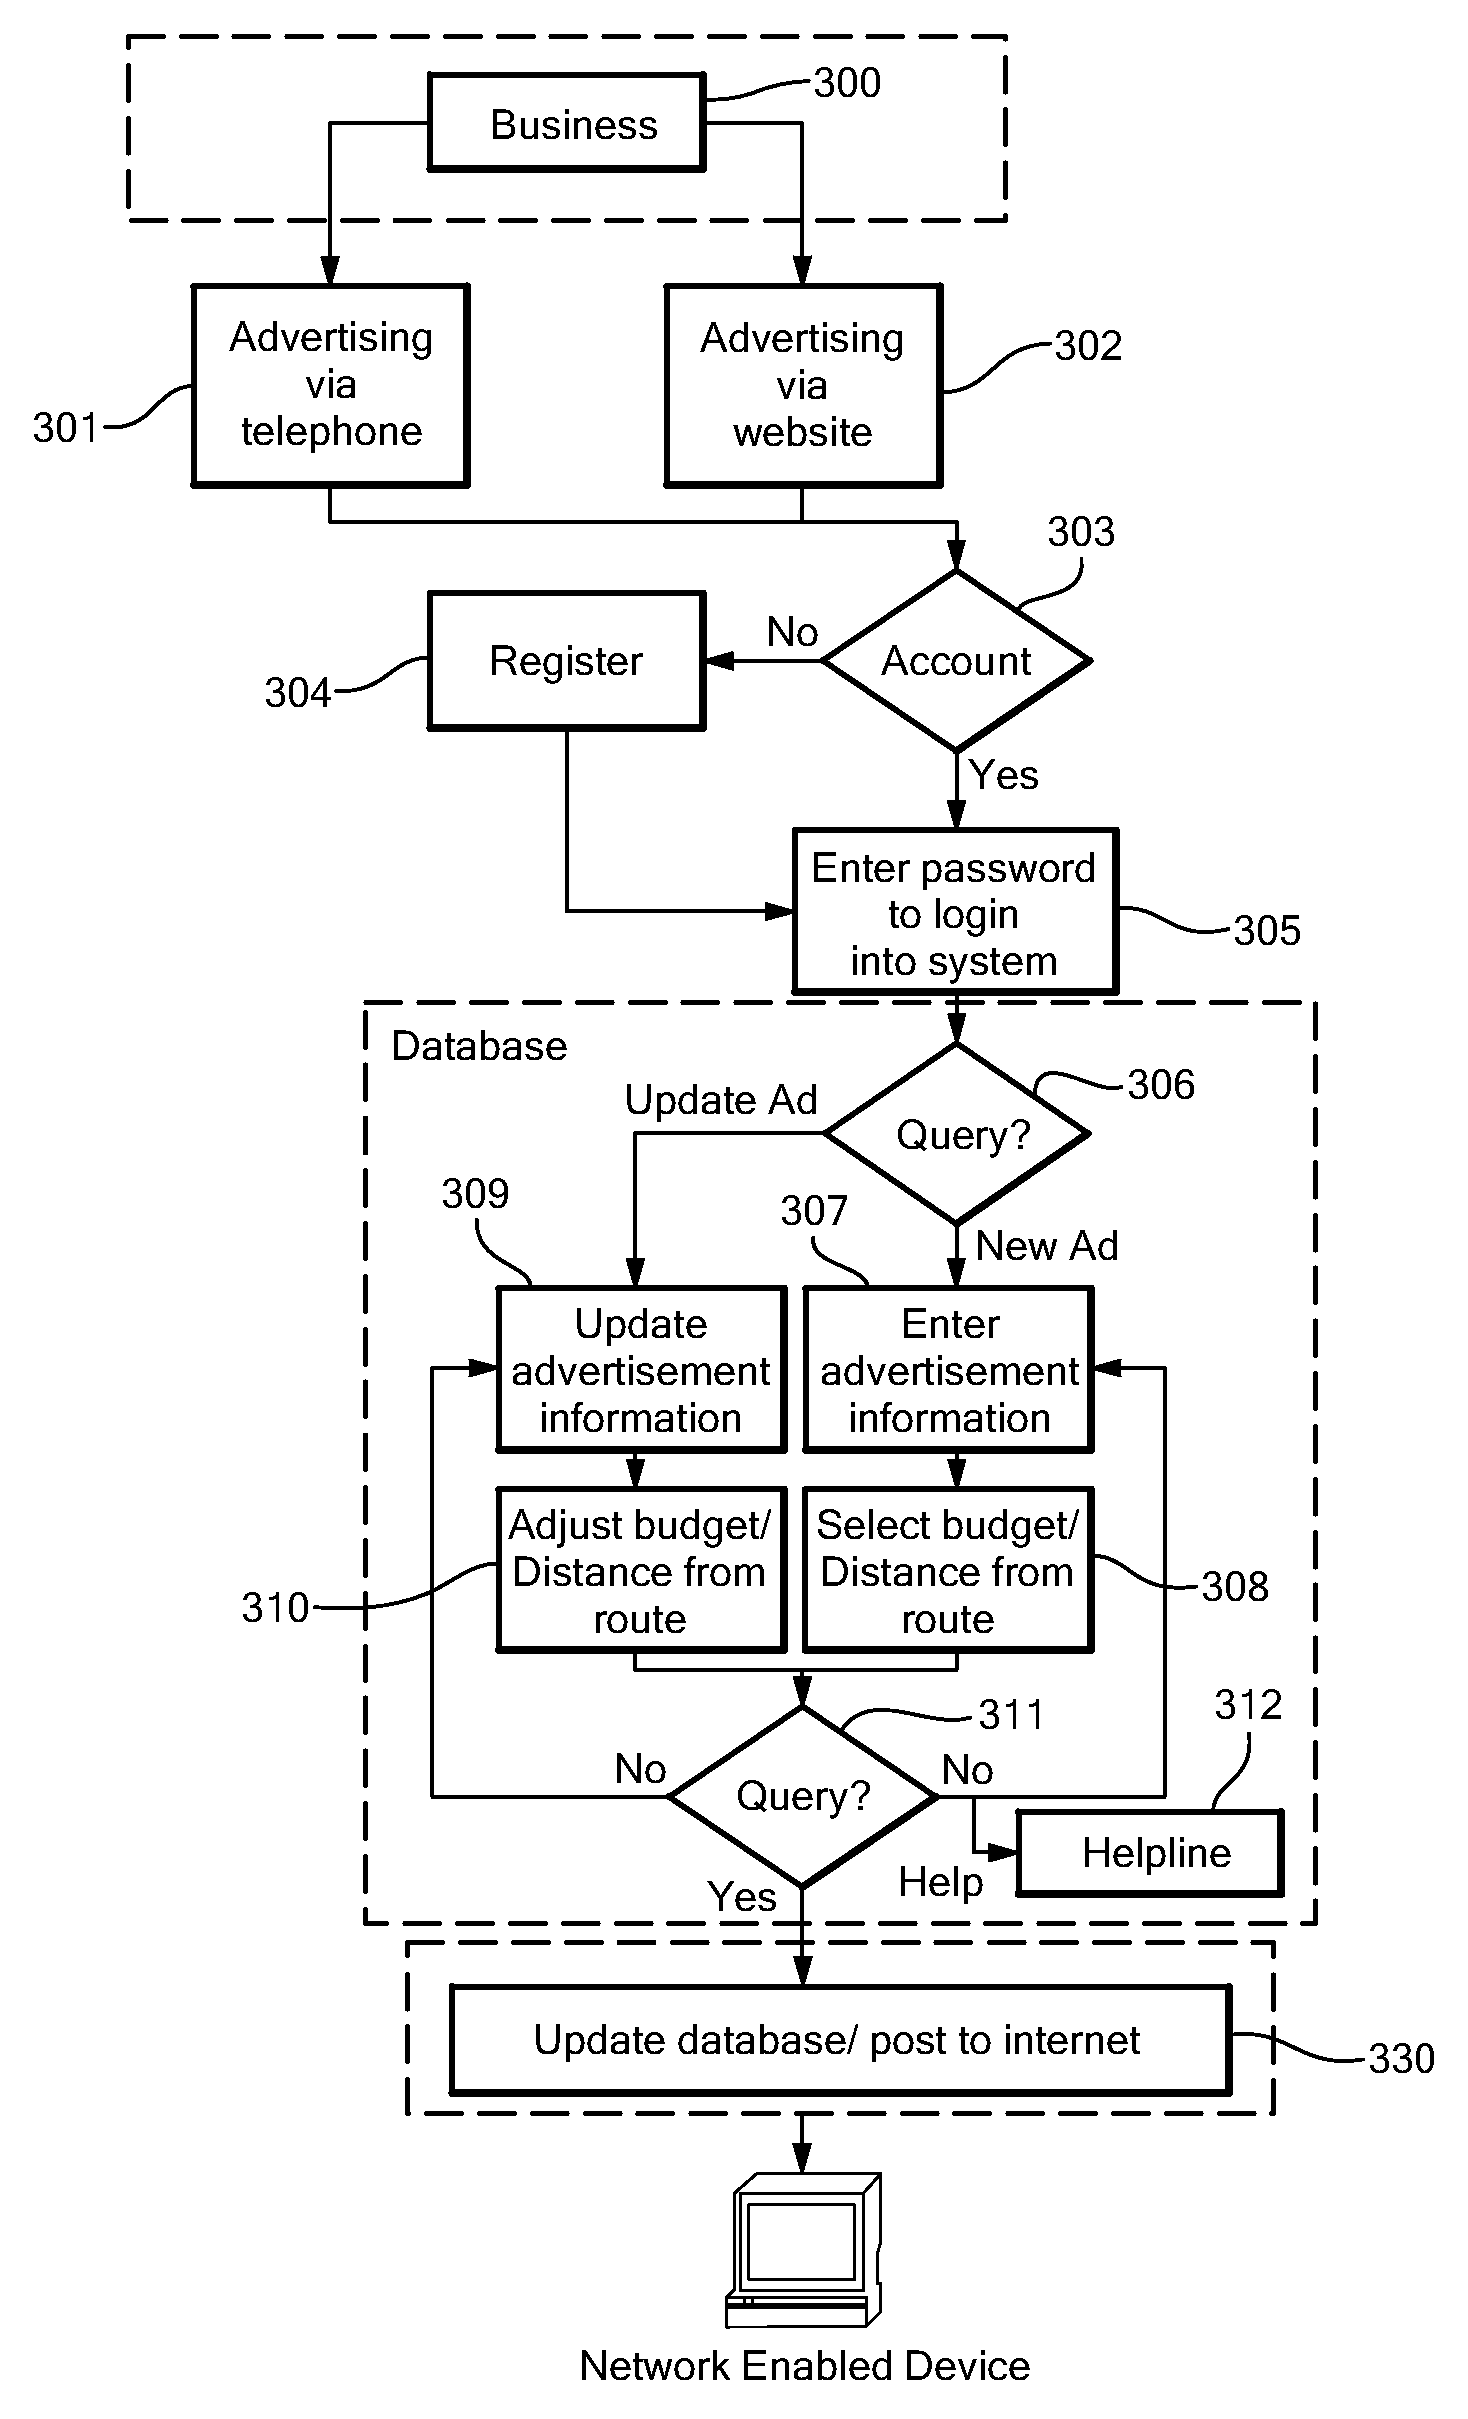 Apparatus and Methods for Providing Route-Based Advertising and Vendor-Reported Business Information over a Network